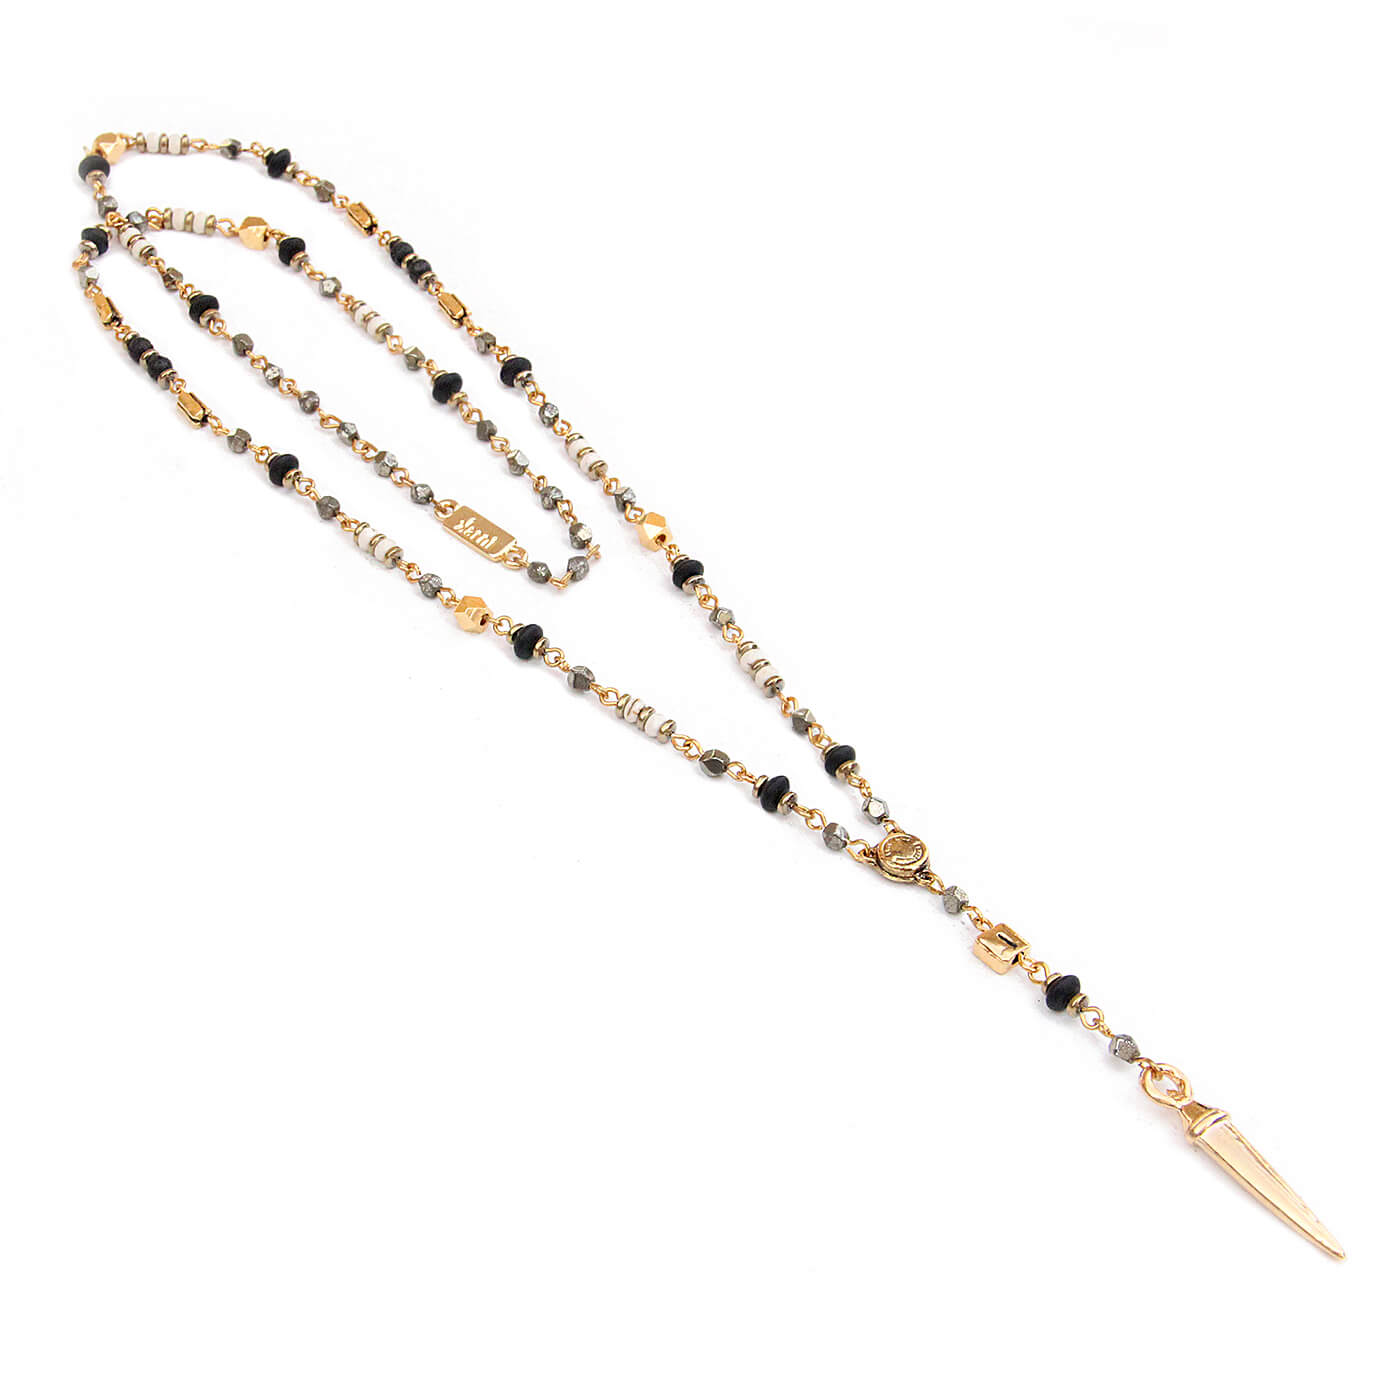 Rosary Necklace - Goldplated, black, white